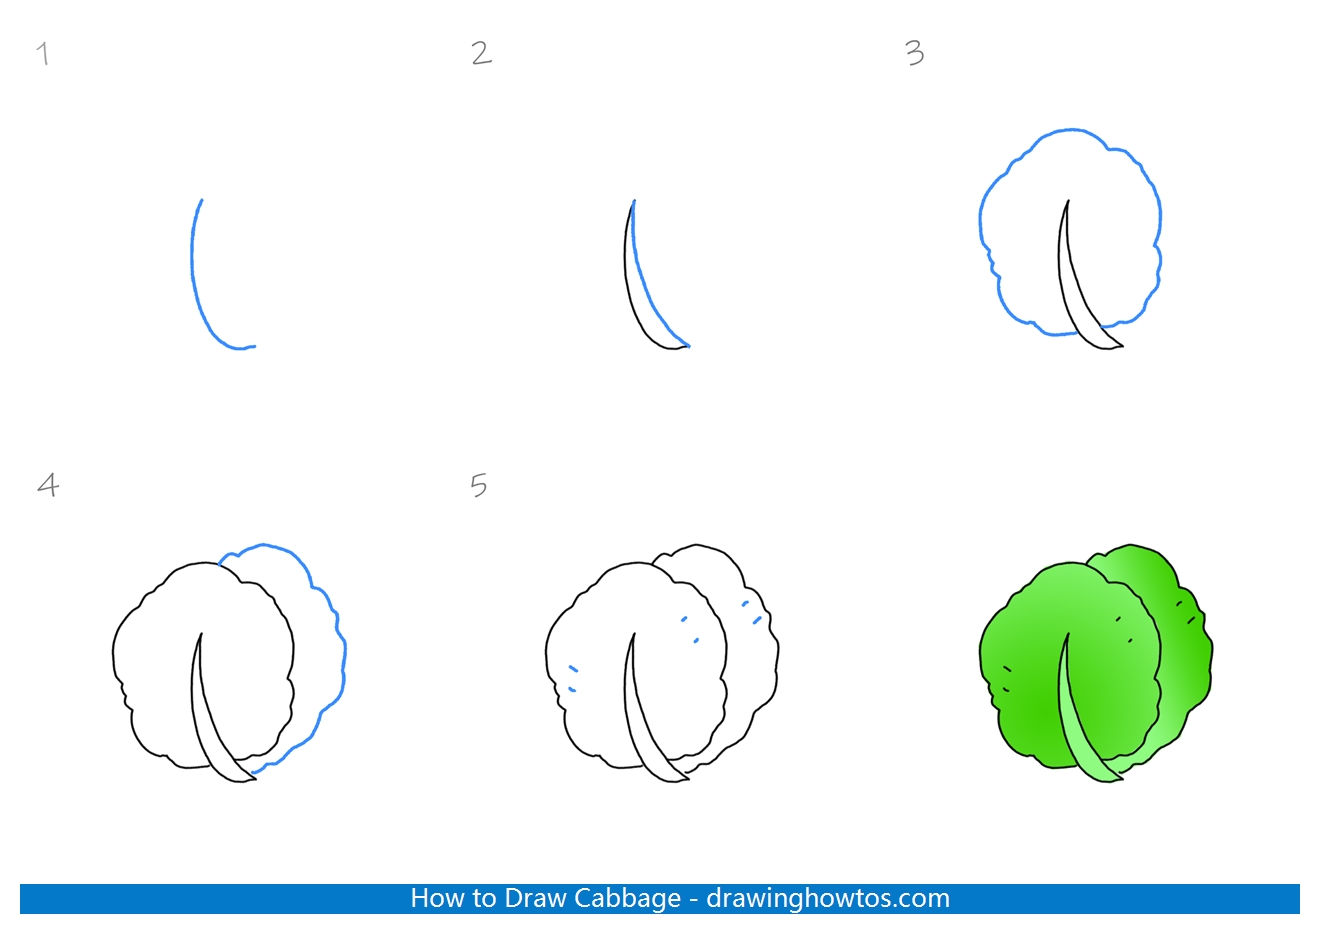 How to Draw a Cabbage Step by Step